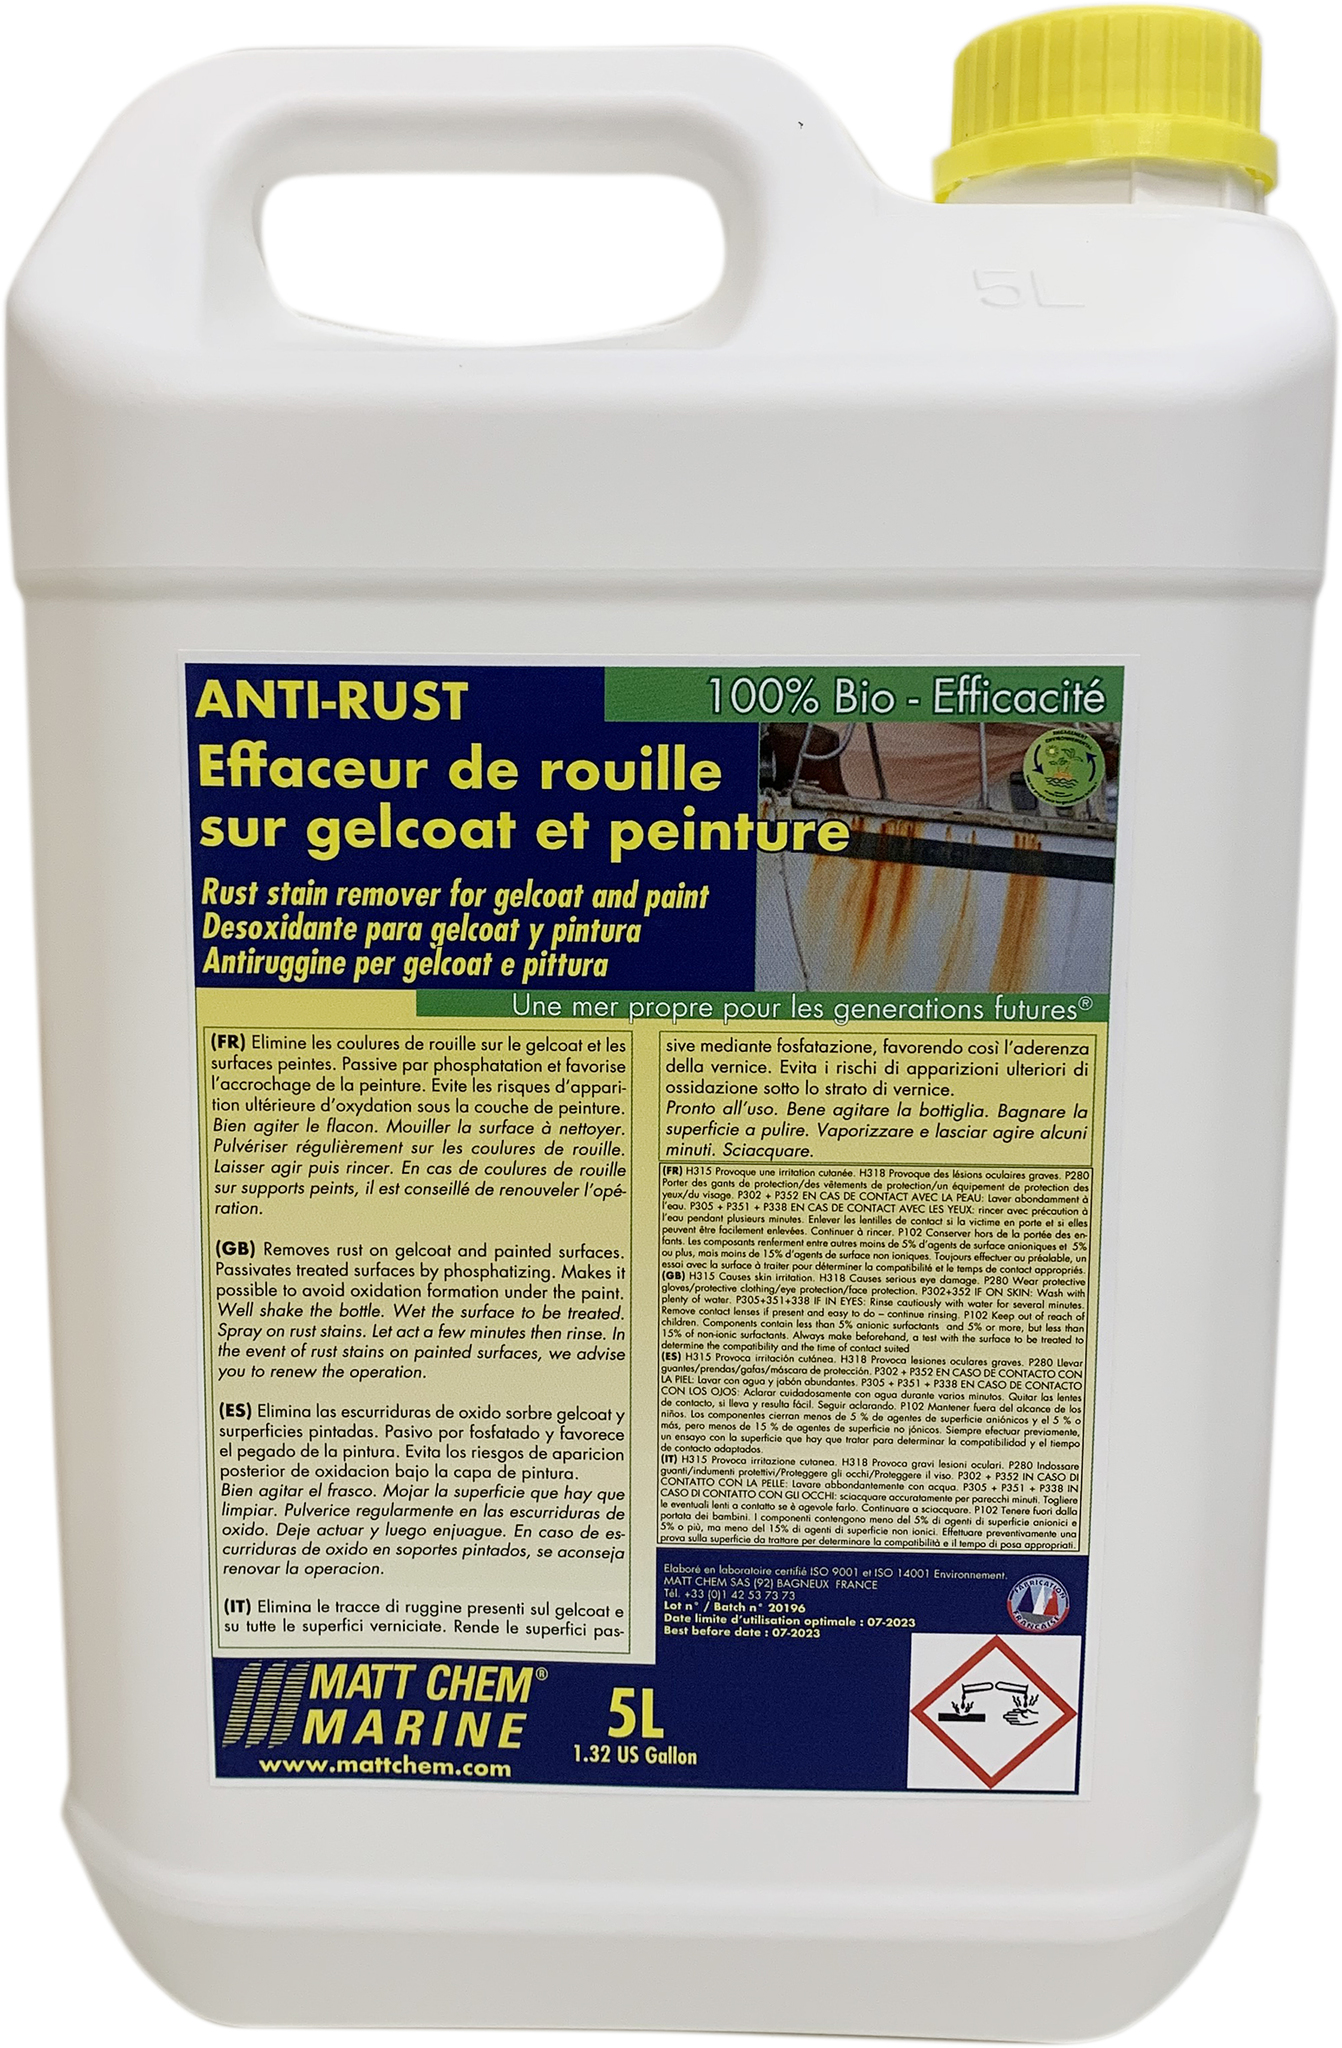 Rust stains remover for gelcoat and paint Anti-rust